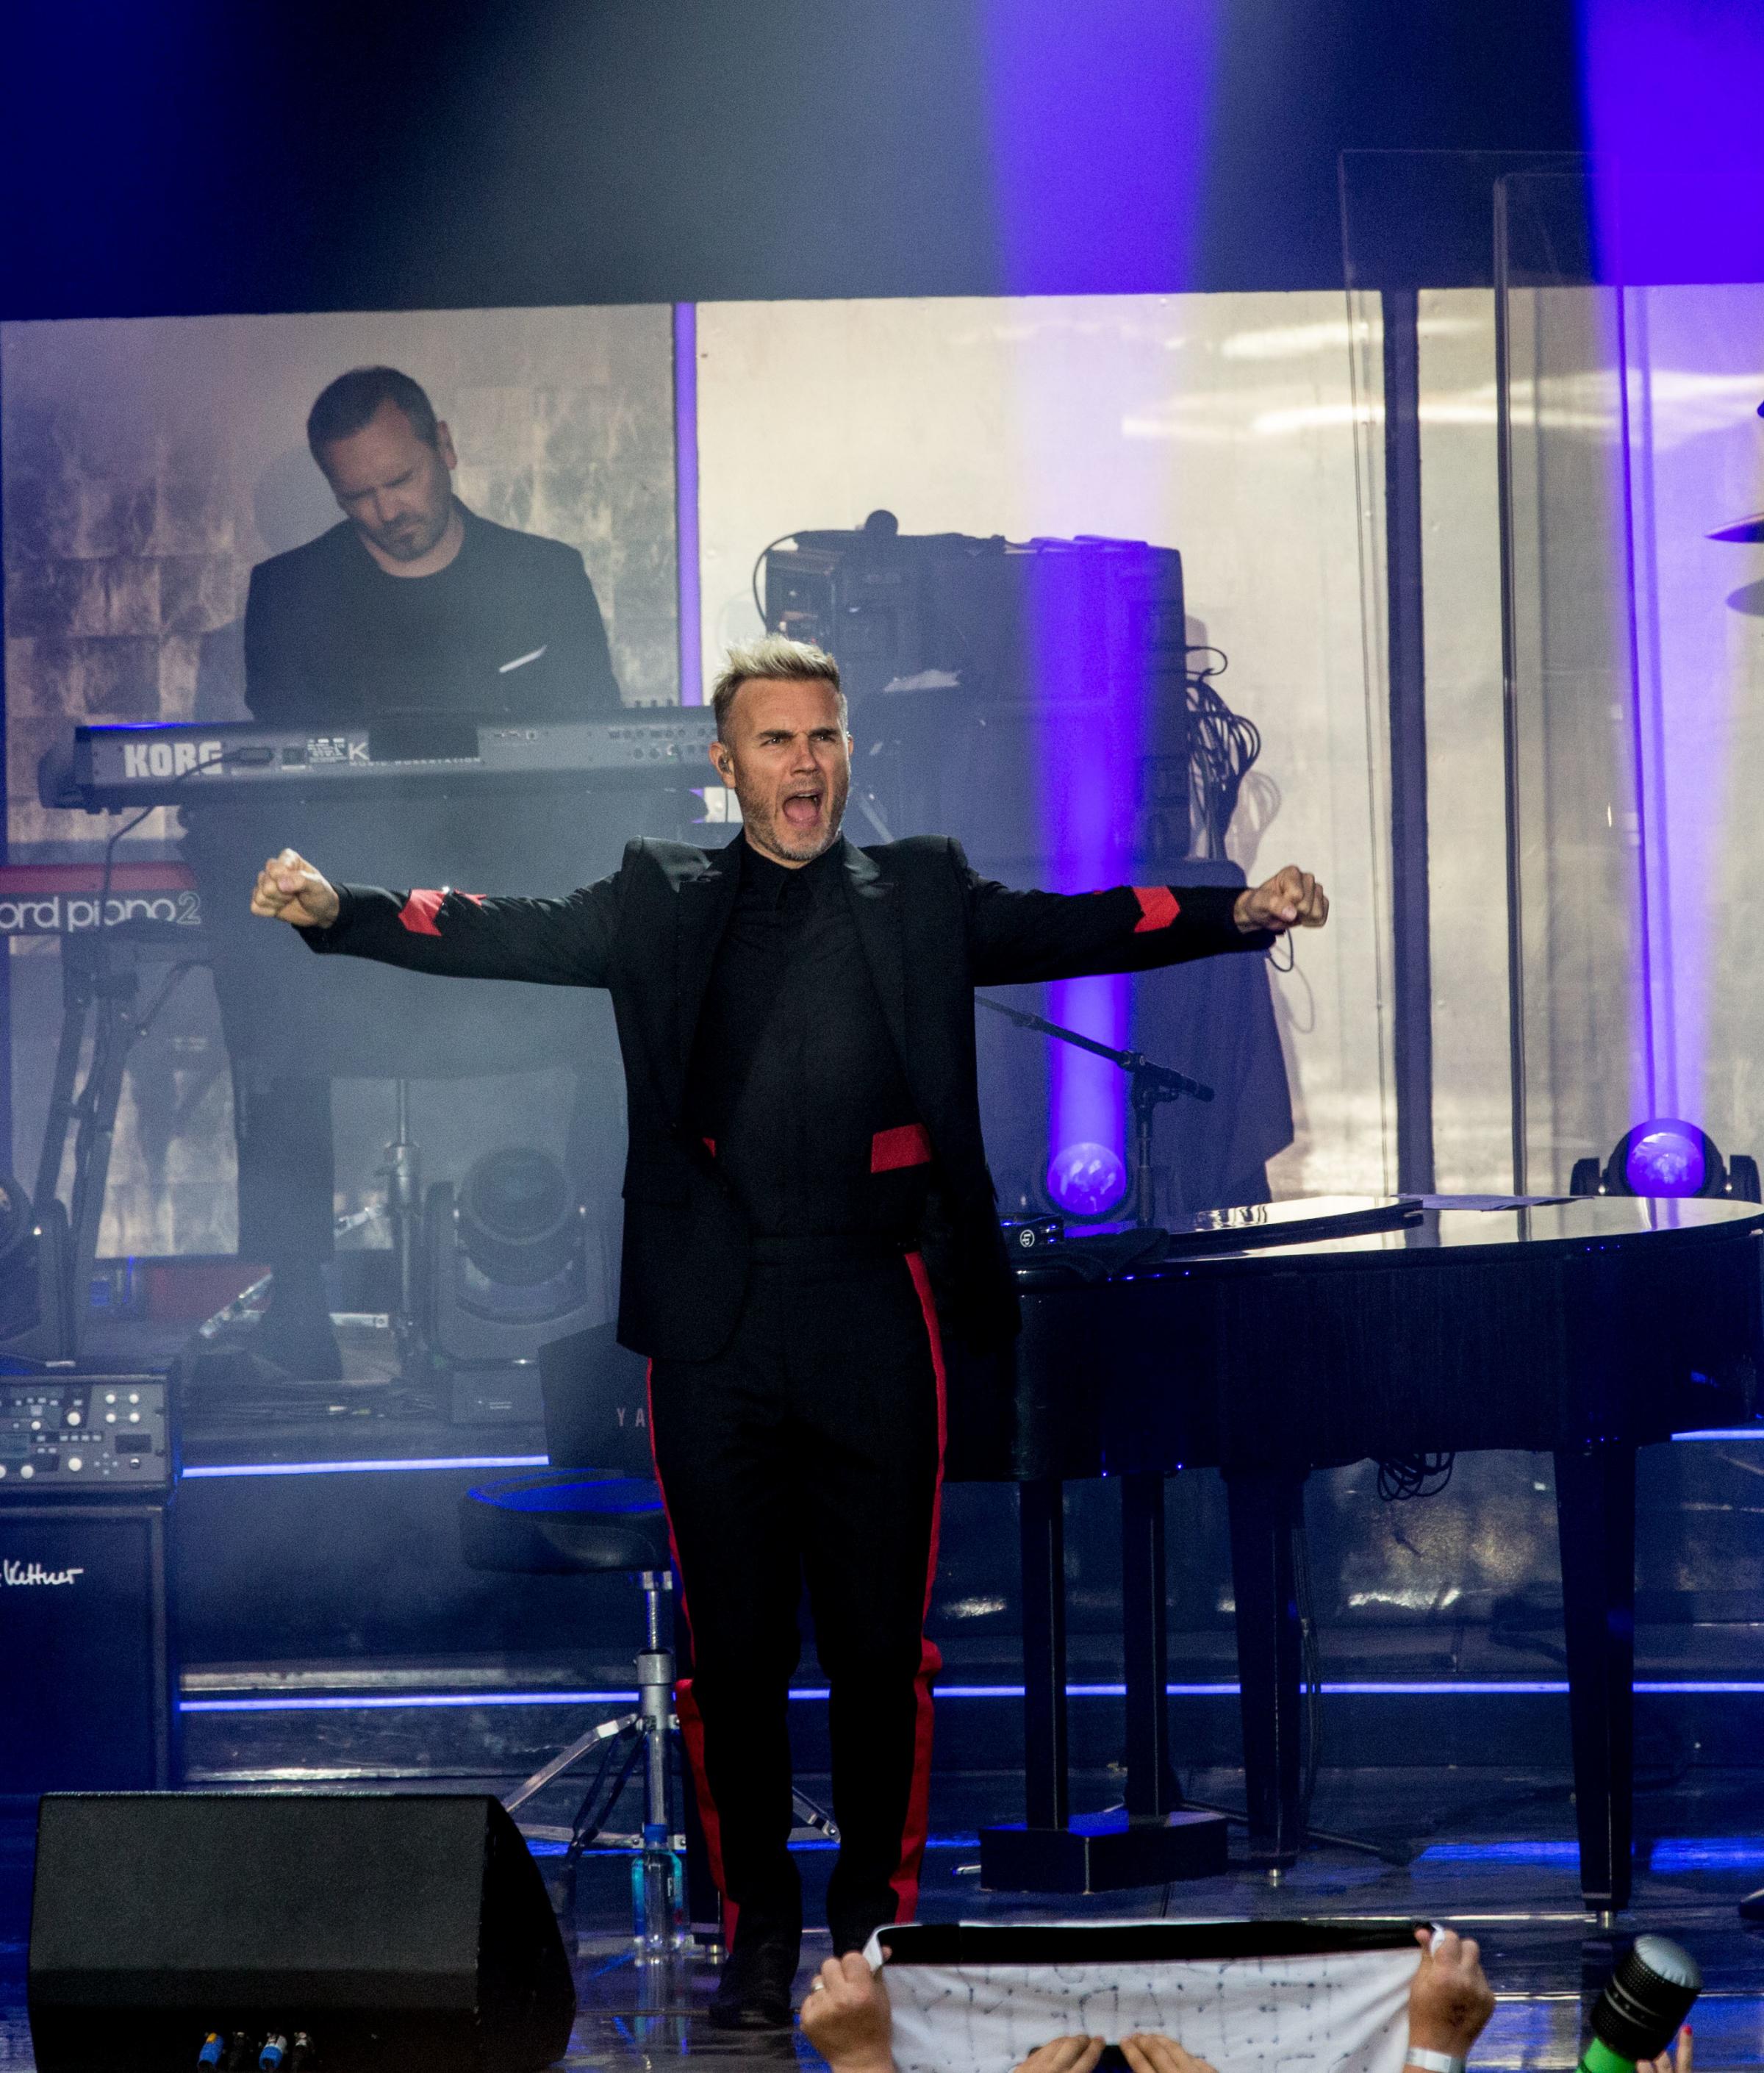 Photo by Brent Jones. Forest Live, Delamere Forest - Gary Barlow